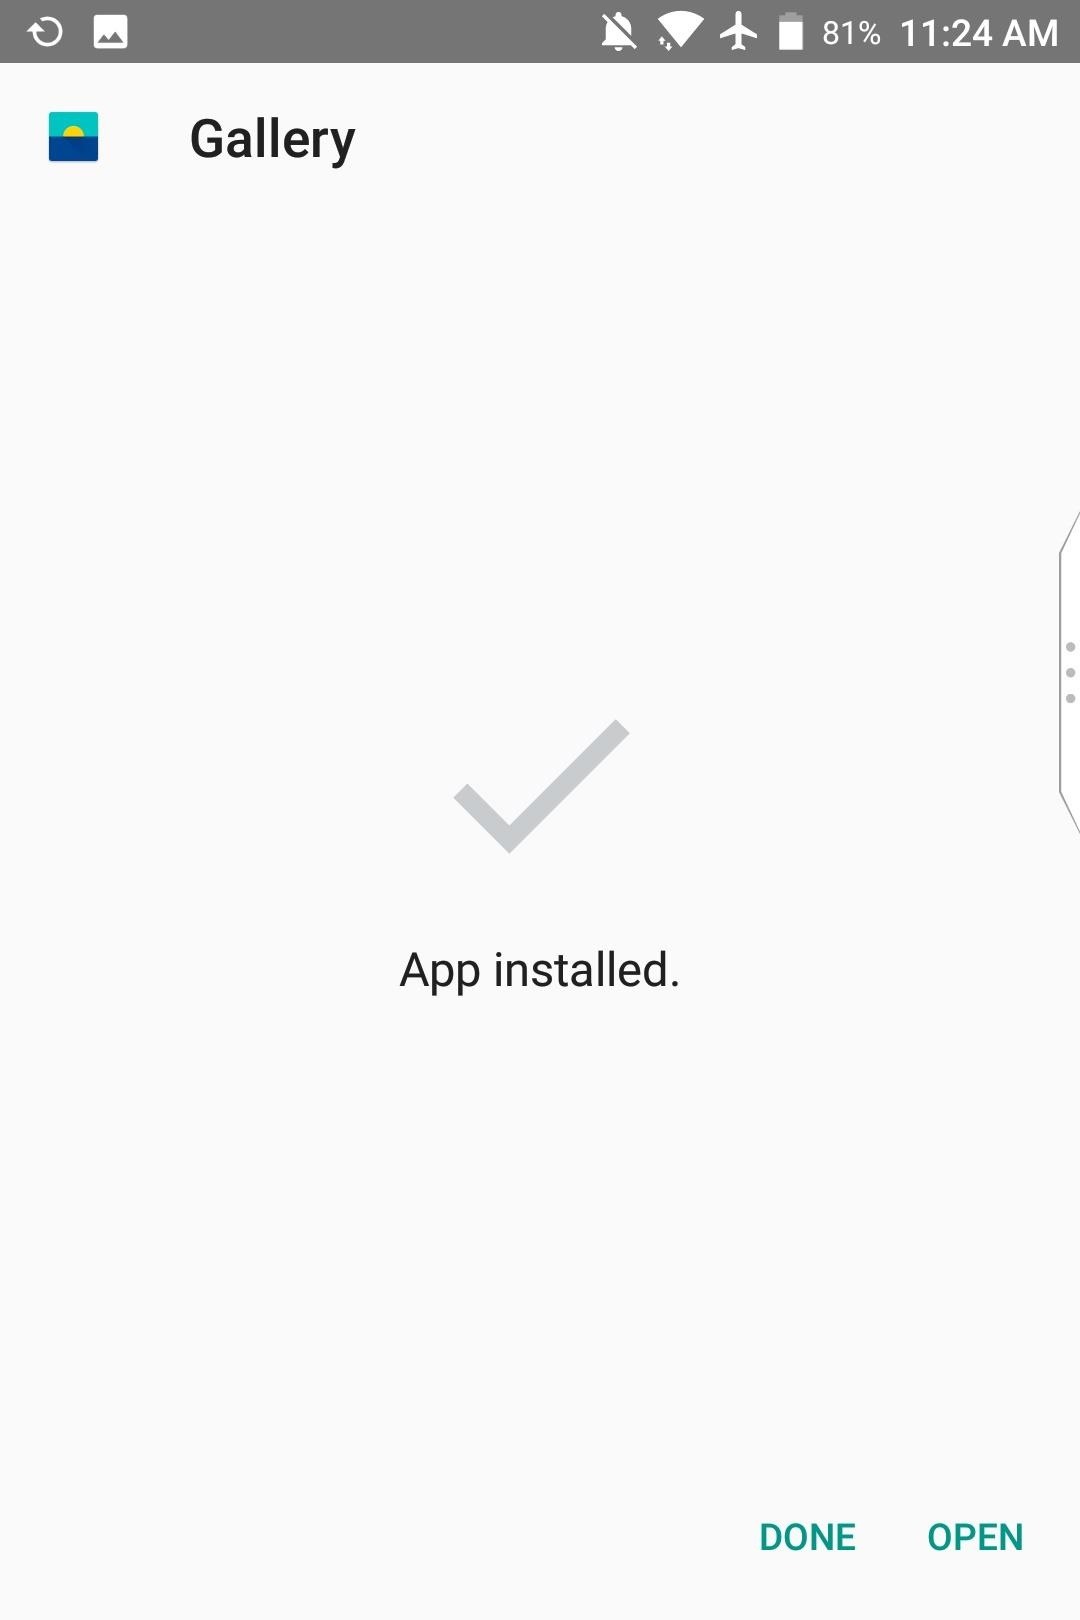 How to Get OnePlus' Minimalist Gallery App on Any Phone